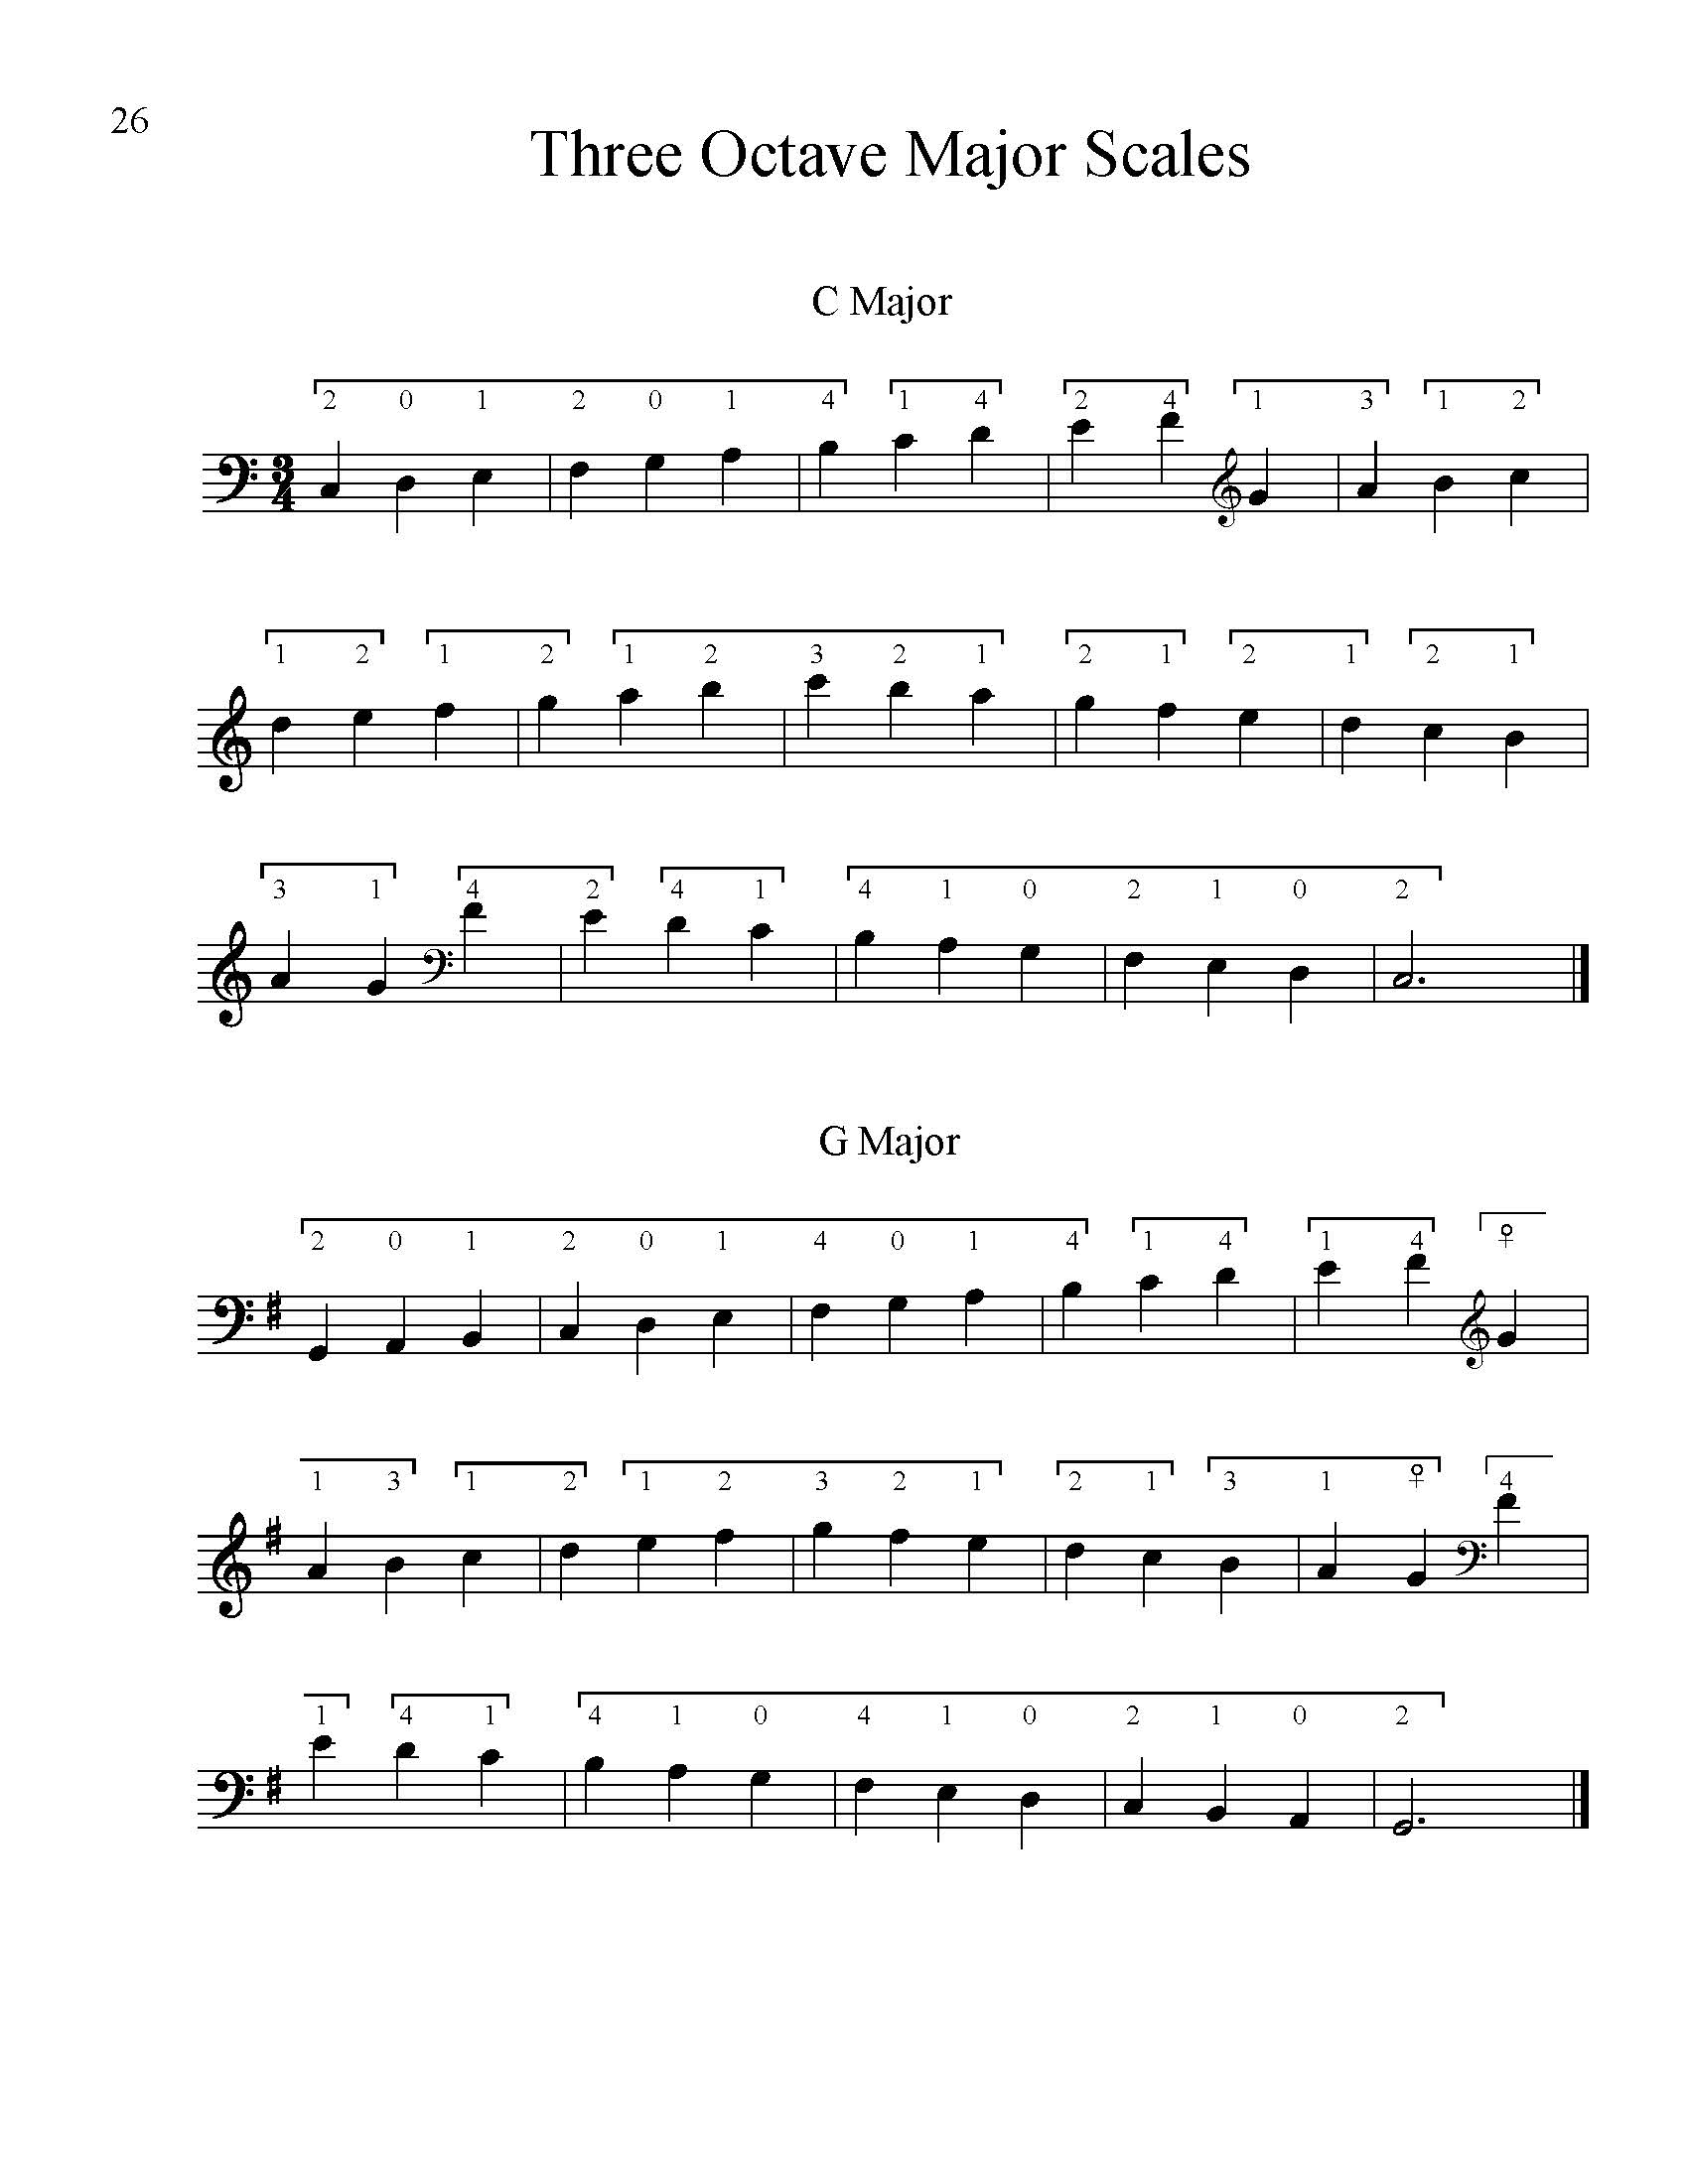 Scale book example, sheet music for three octave bass scales